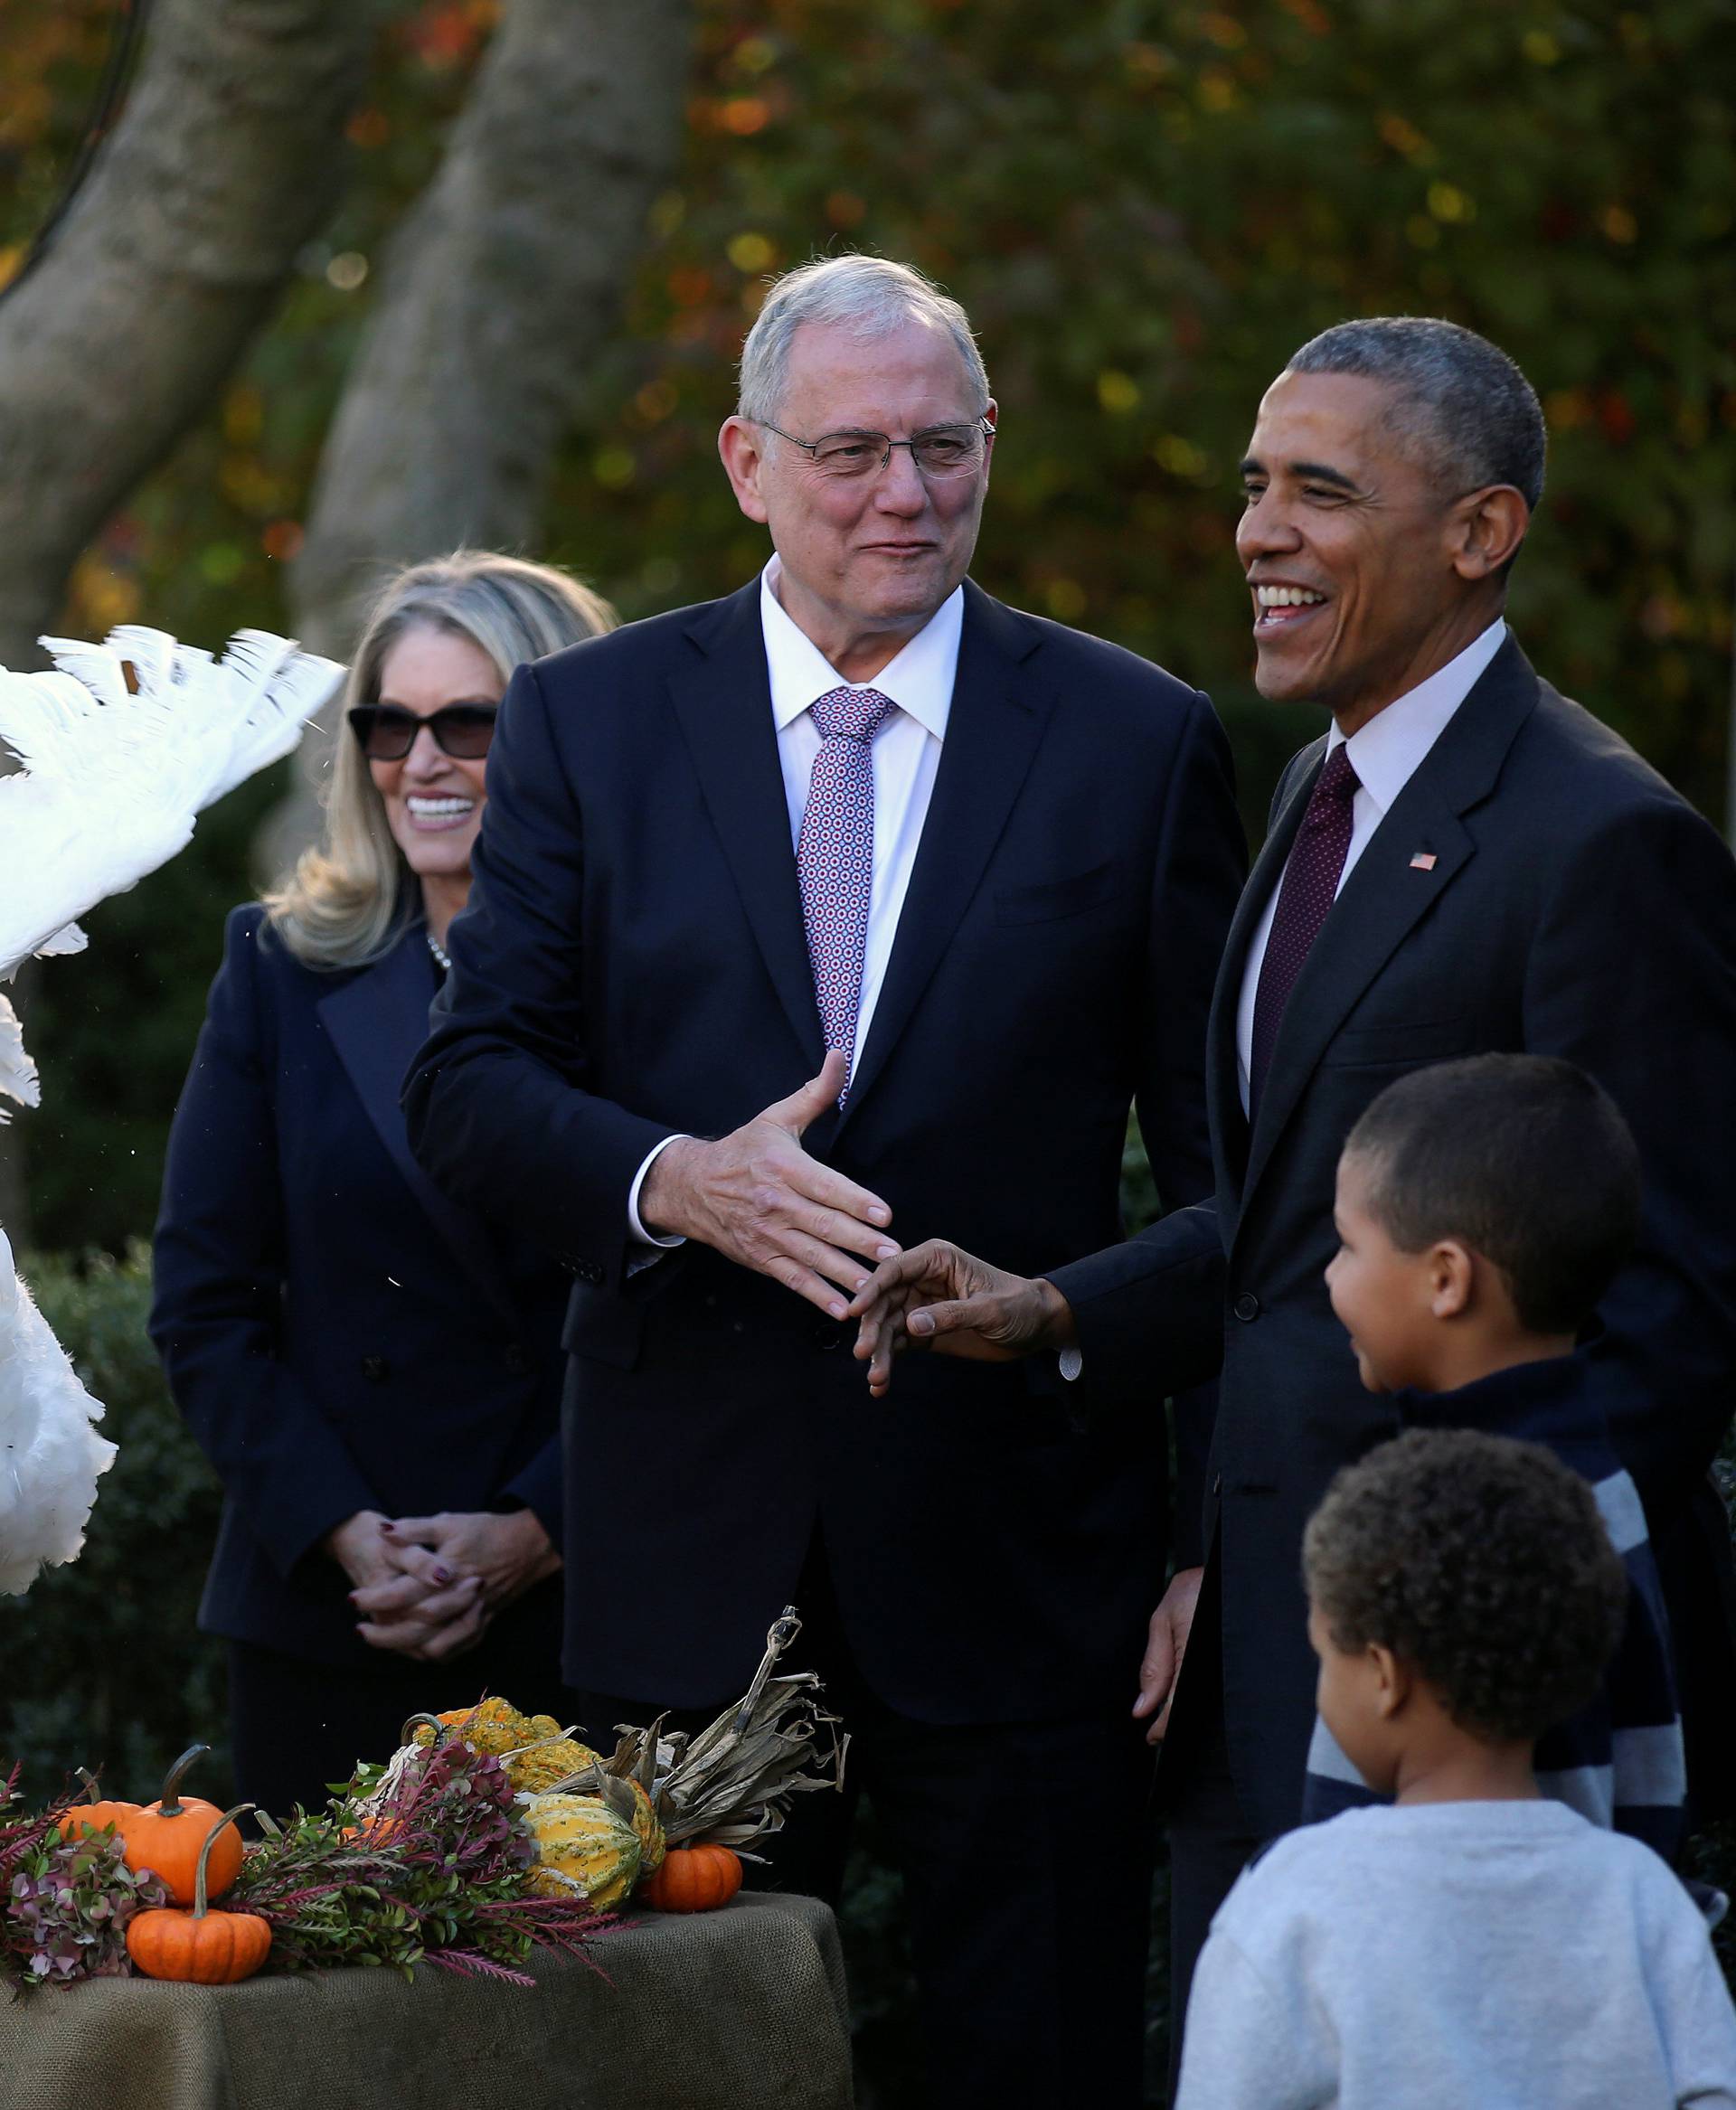 U.S. President Barack Obama leaves after pardoning the National Thanksgiving turkey during the 69th annual presentation of the turkey in the Rose Garden of the White House in Washington